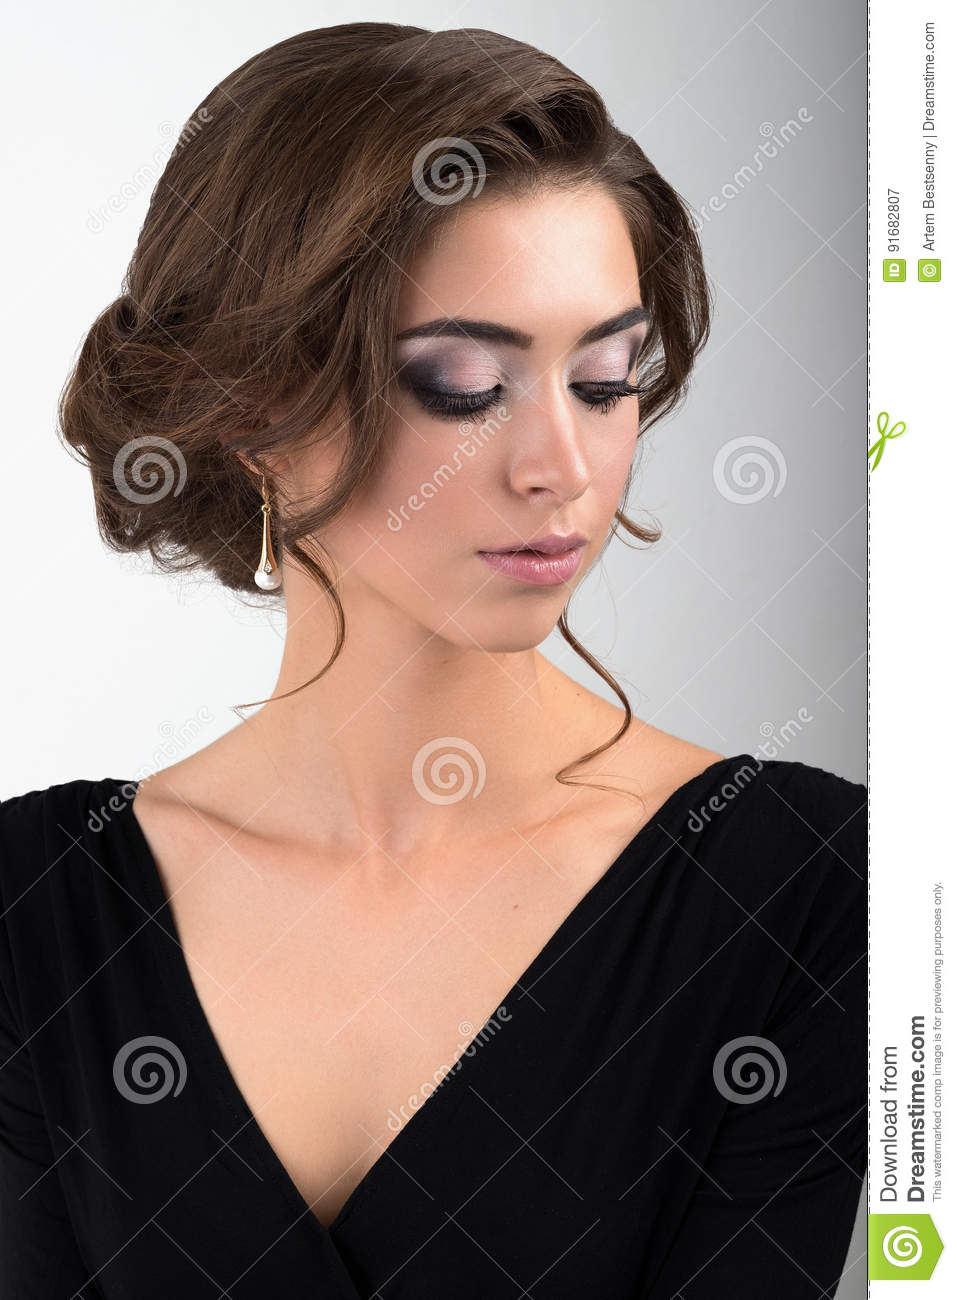 Eye Makeup For Black Dress Close Up Portrait Of Brunette With Evening Makeup And Collected Hair